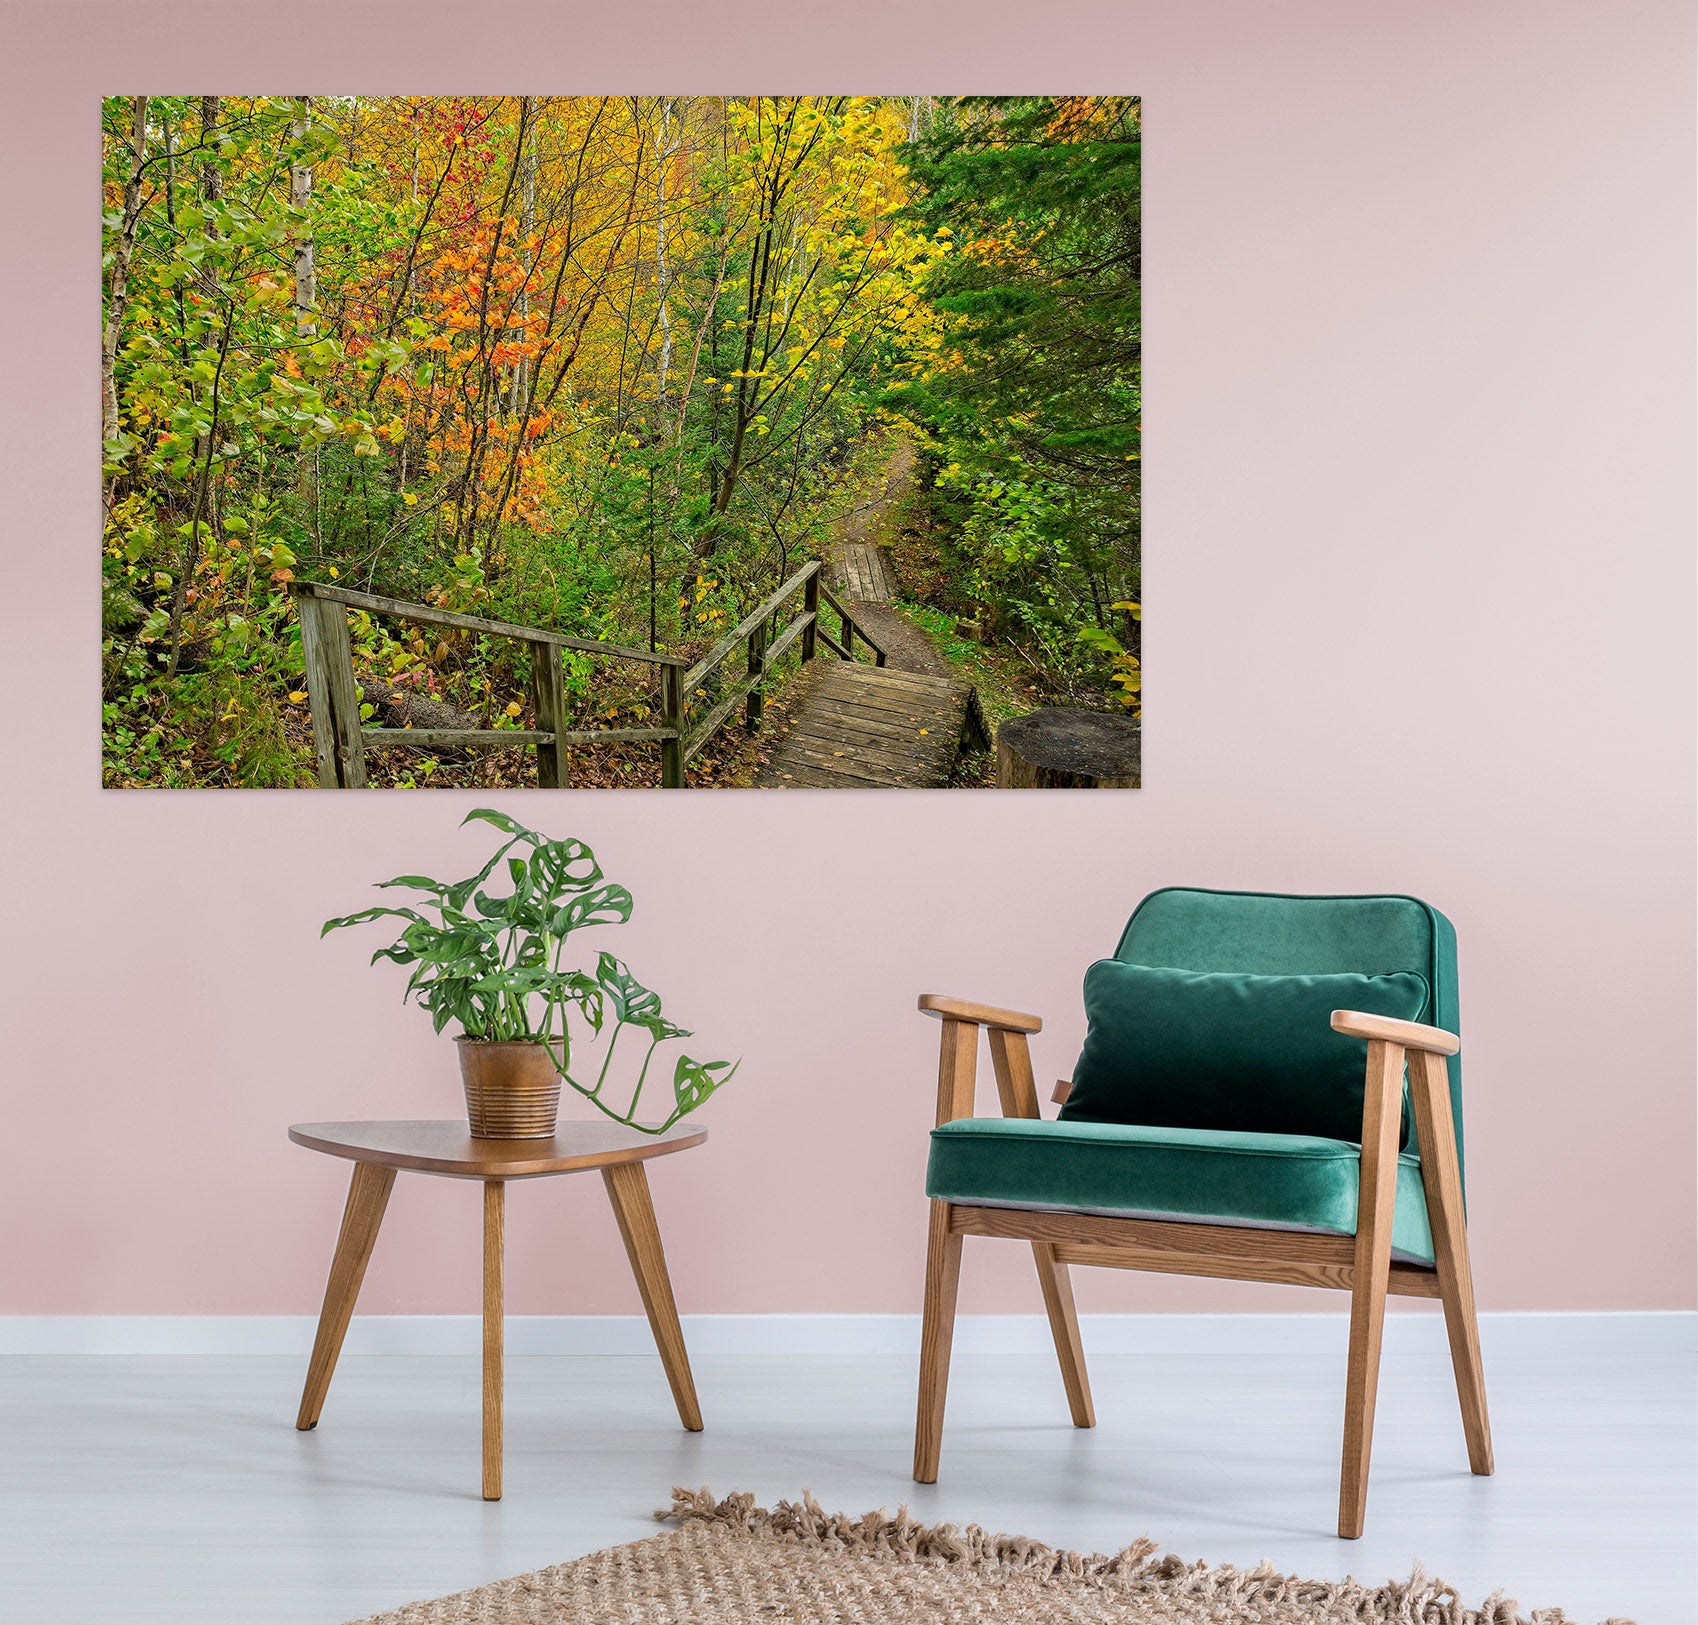 3D Forest Staircase 62110 Kathy Barefield Wall Sticker